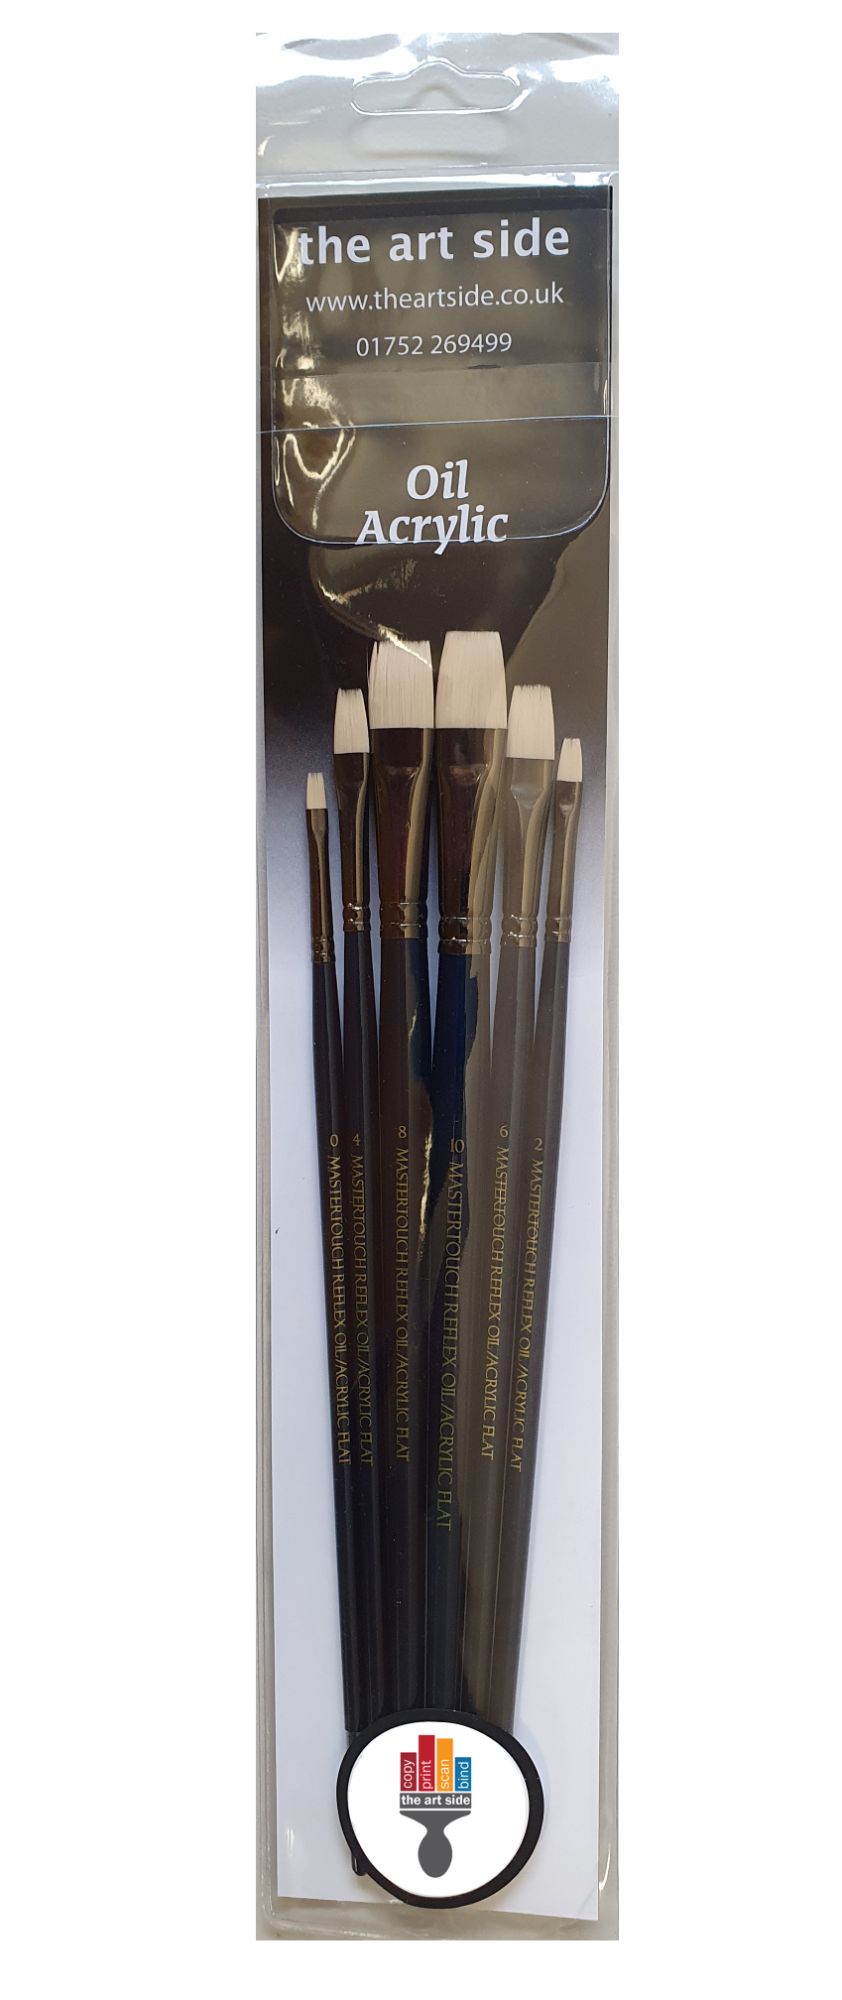 Pro Arte Mastertouch Artists 6 Brush Set FLATS. For Acrylic & Oil Paint